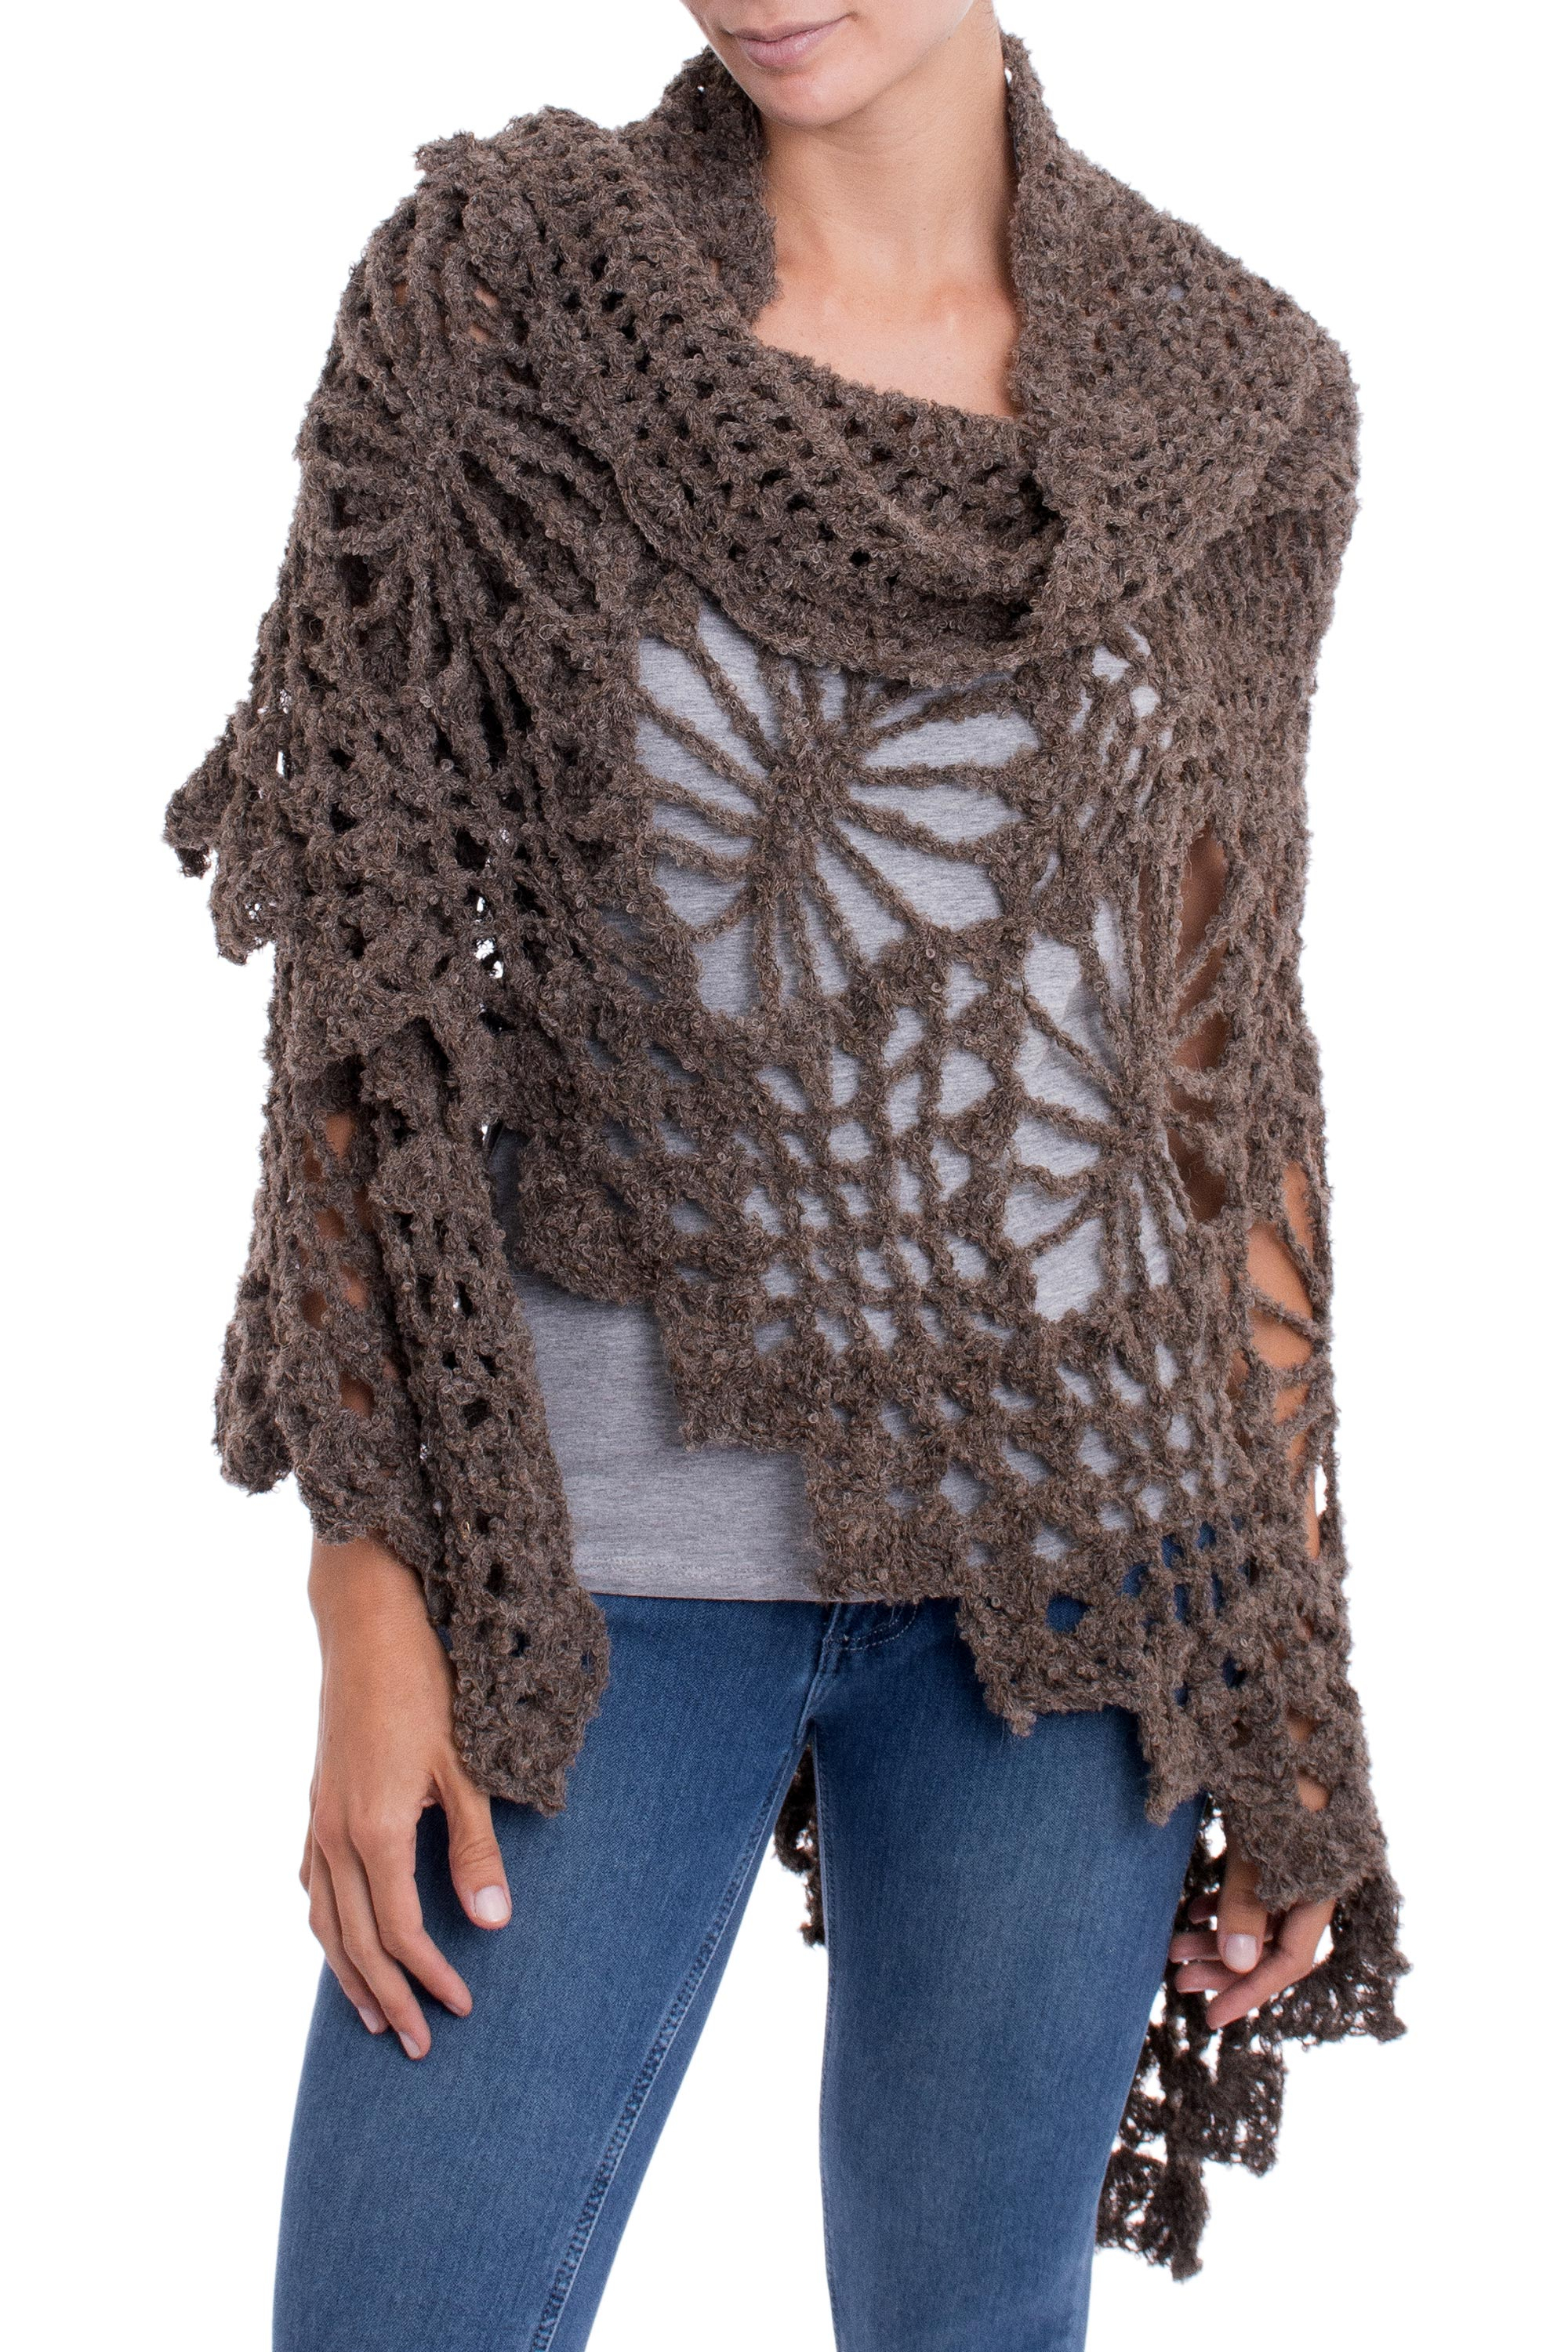 Crocheted Alpaca Blend Shawl in Coffee from Peru, 'Majesty of the Andes'